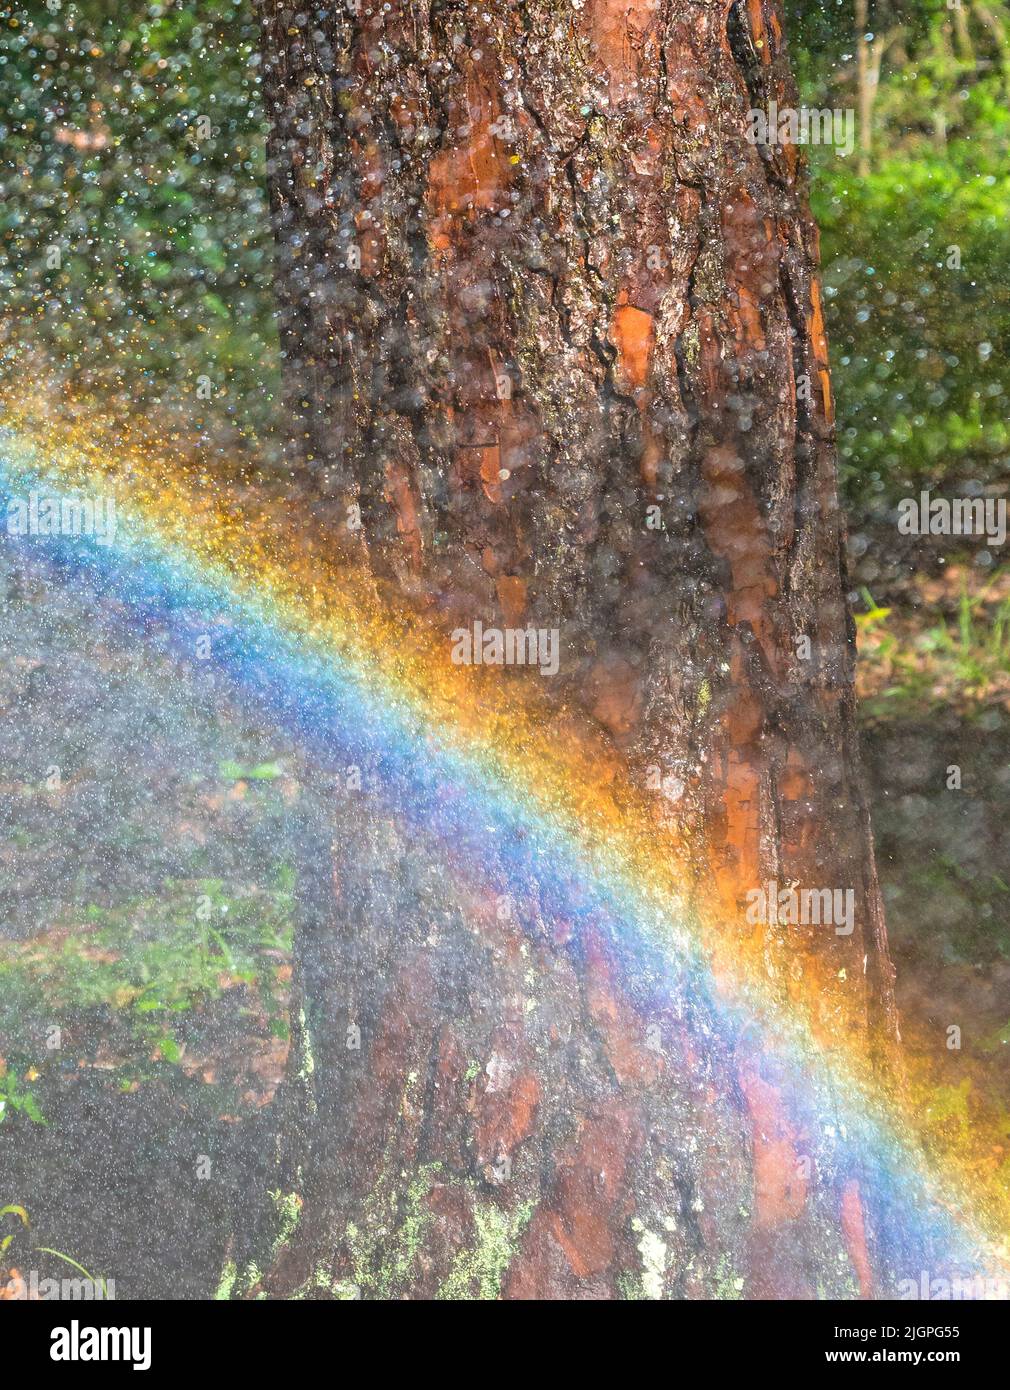 Rainbow formed from spraying with a garden hose. Stock Photo